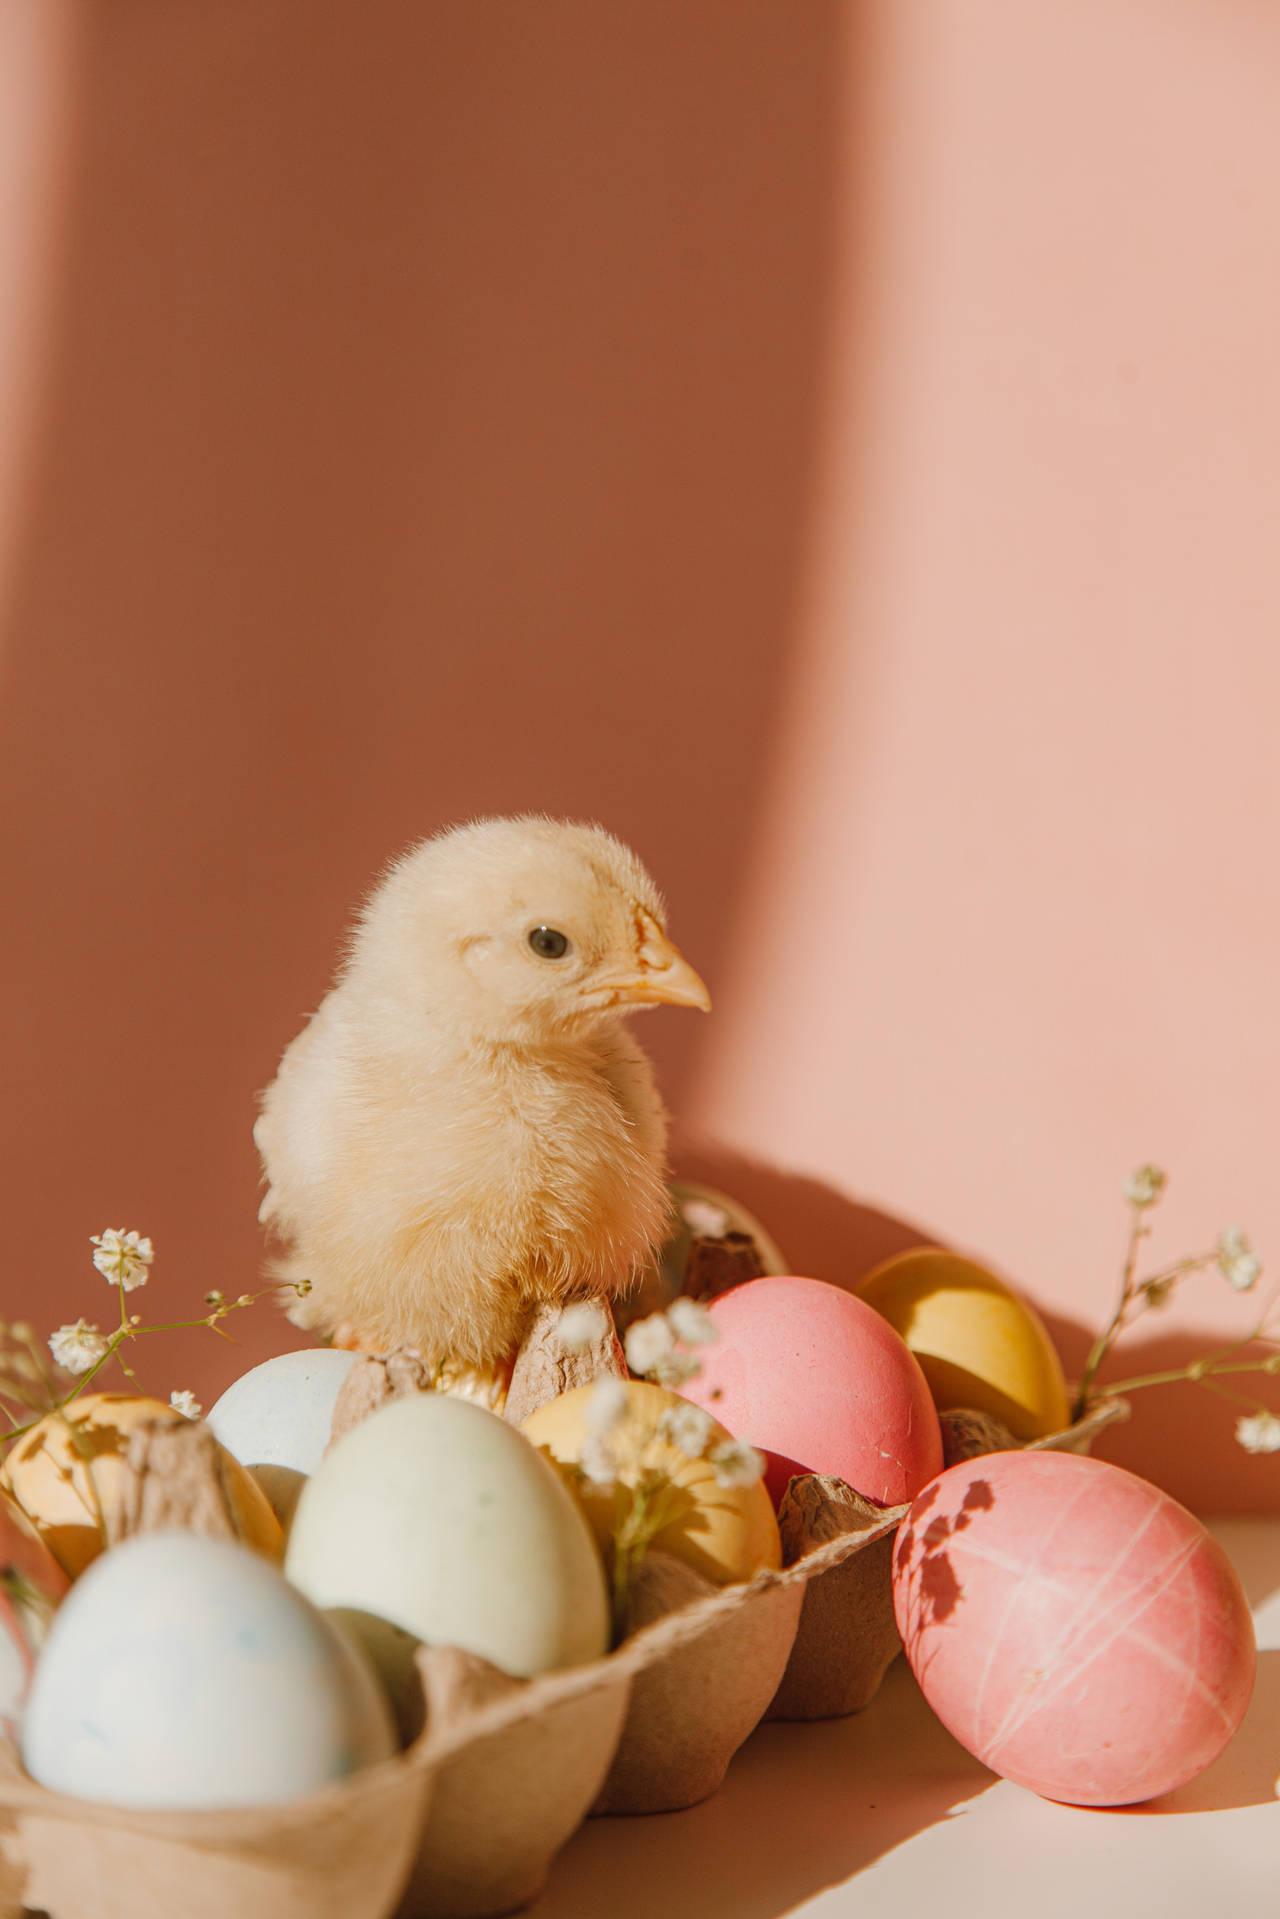 Cute Pastel Aesthetic Colored Eggs And Chick Wallpaper